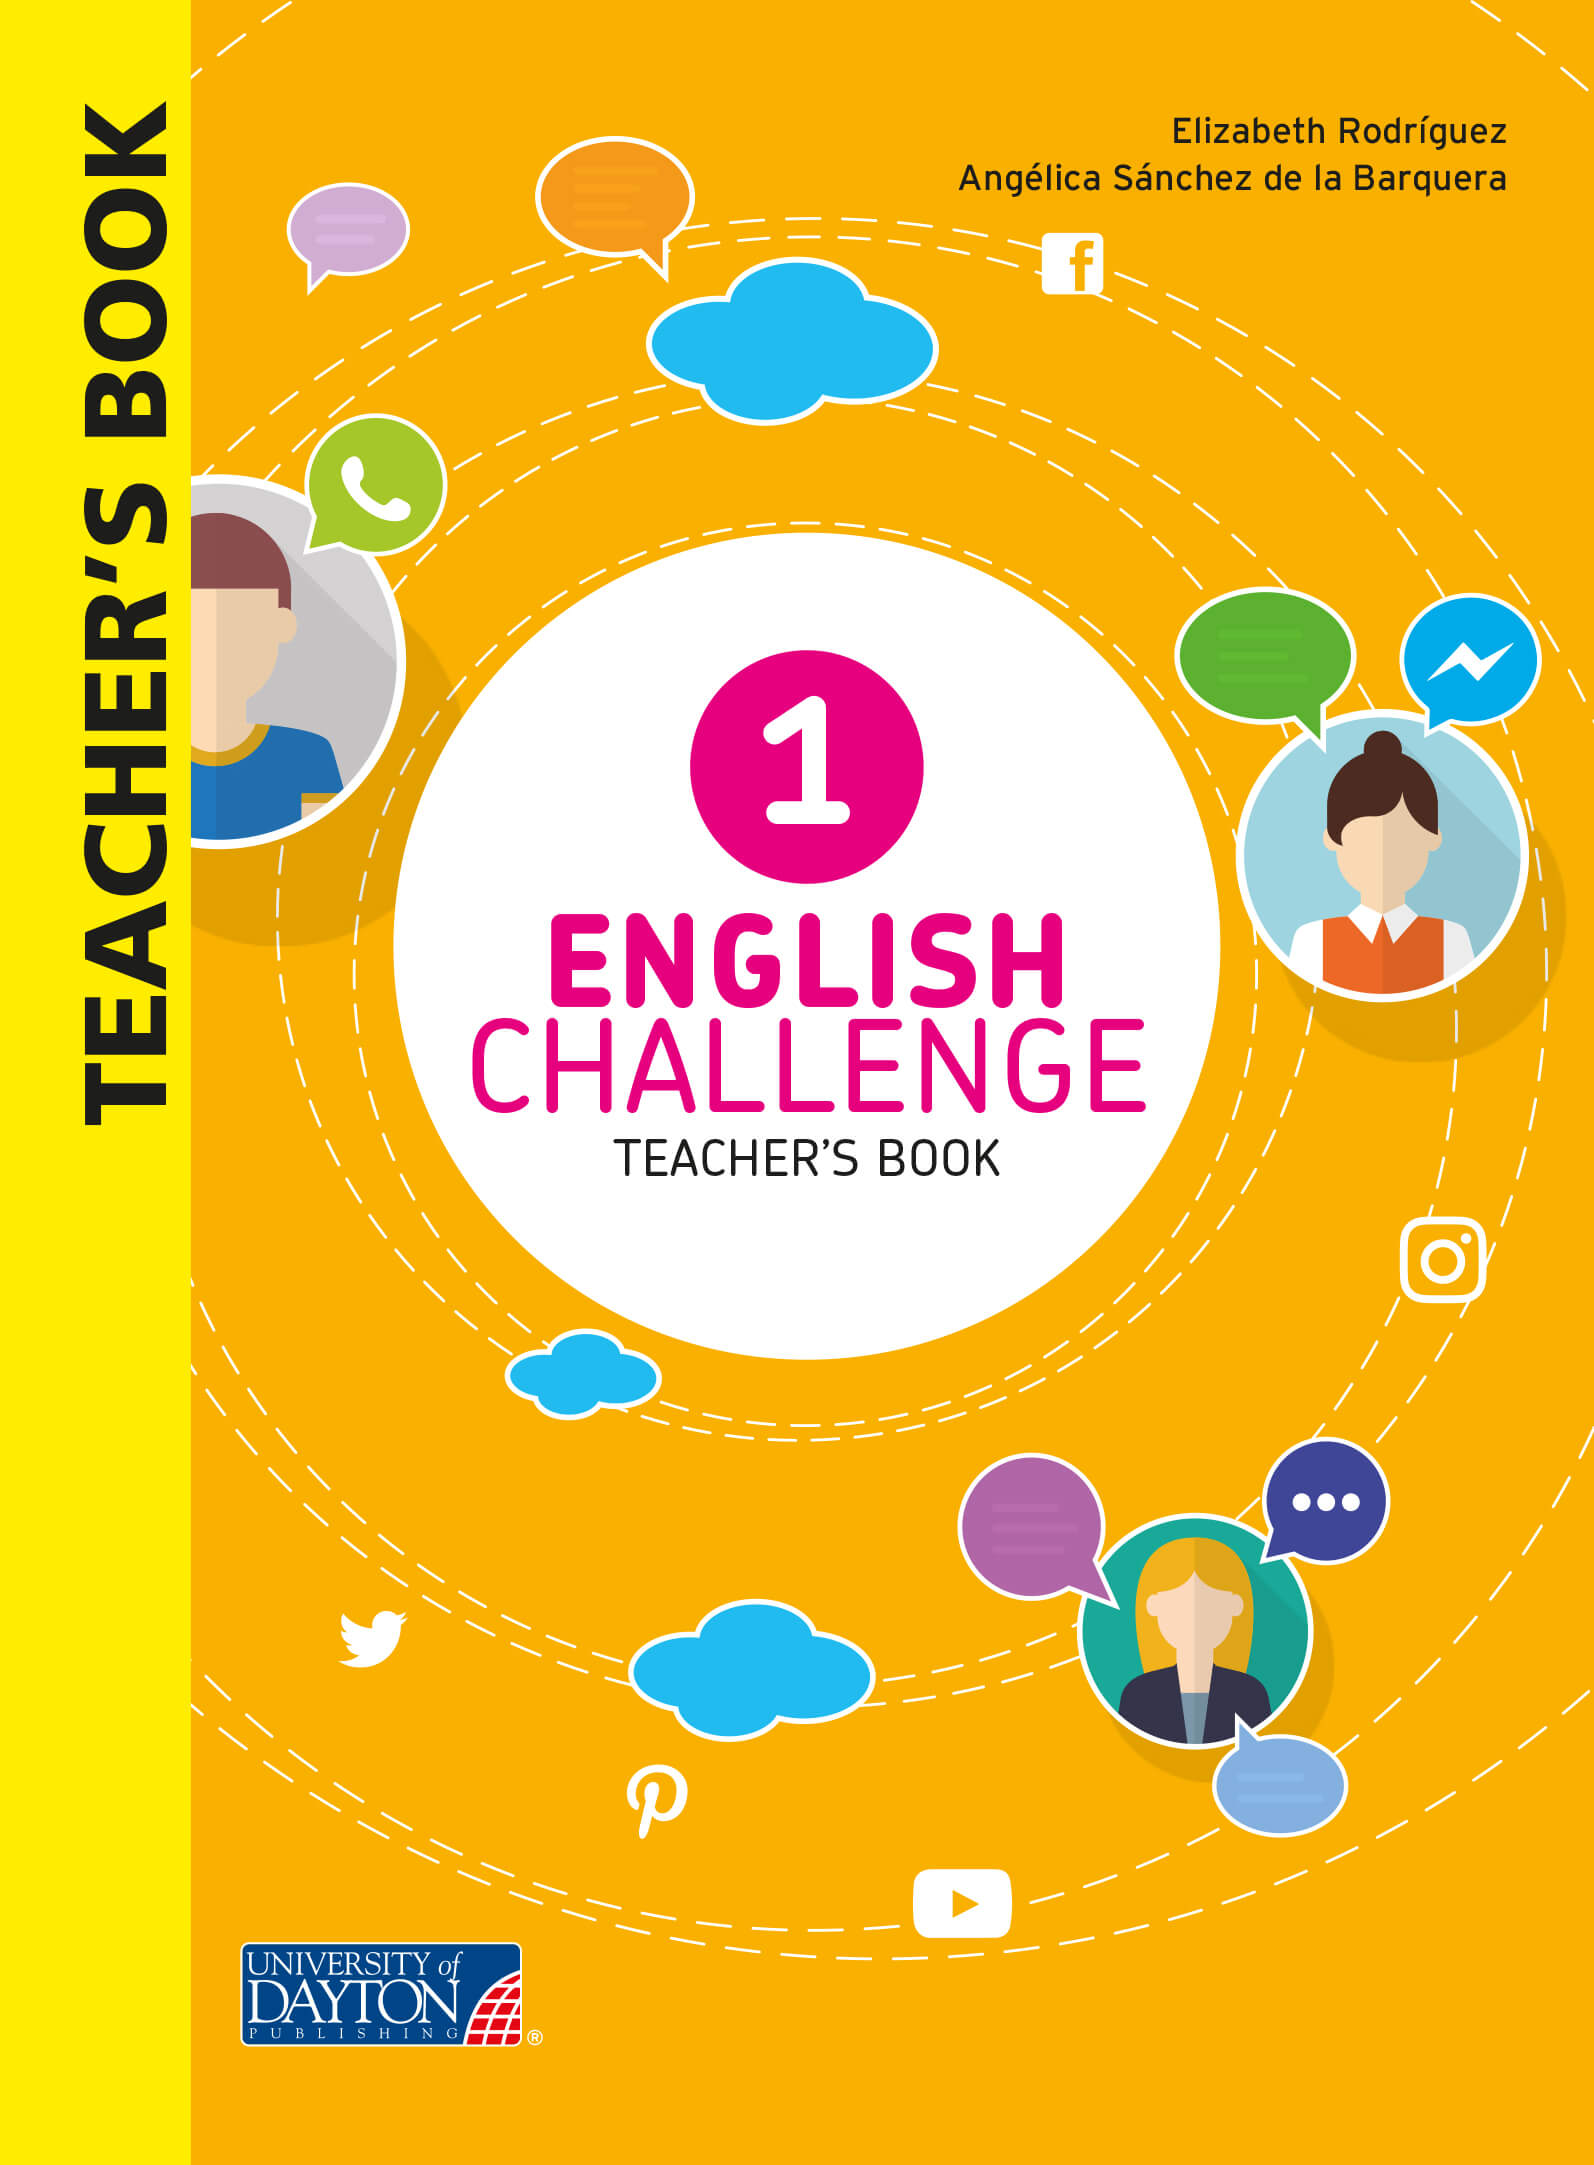 English Challenge 1 : integrated learner's book (Material docente)